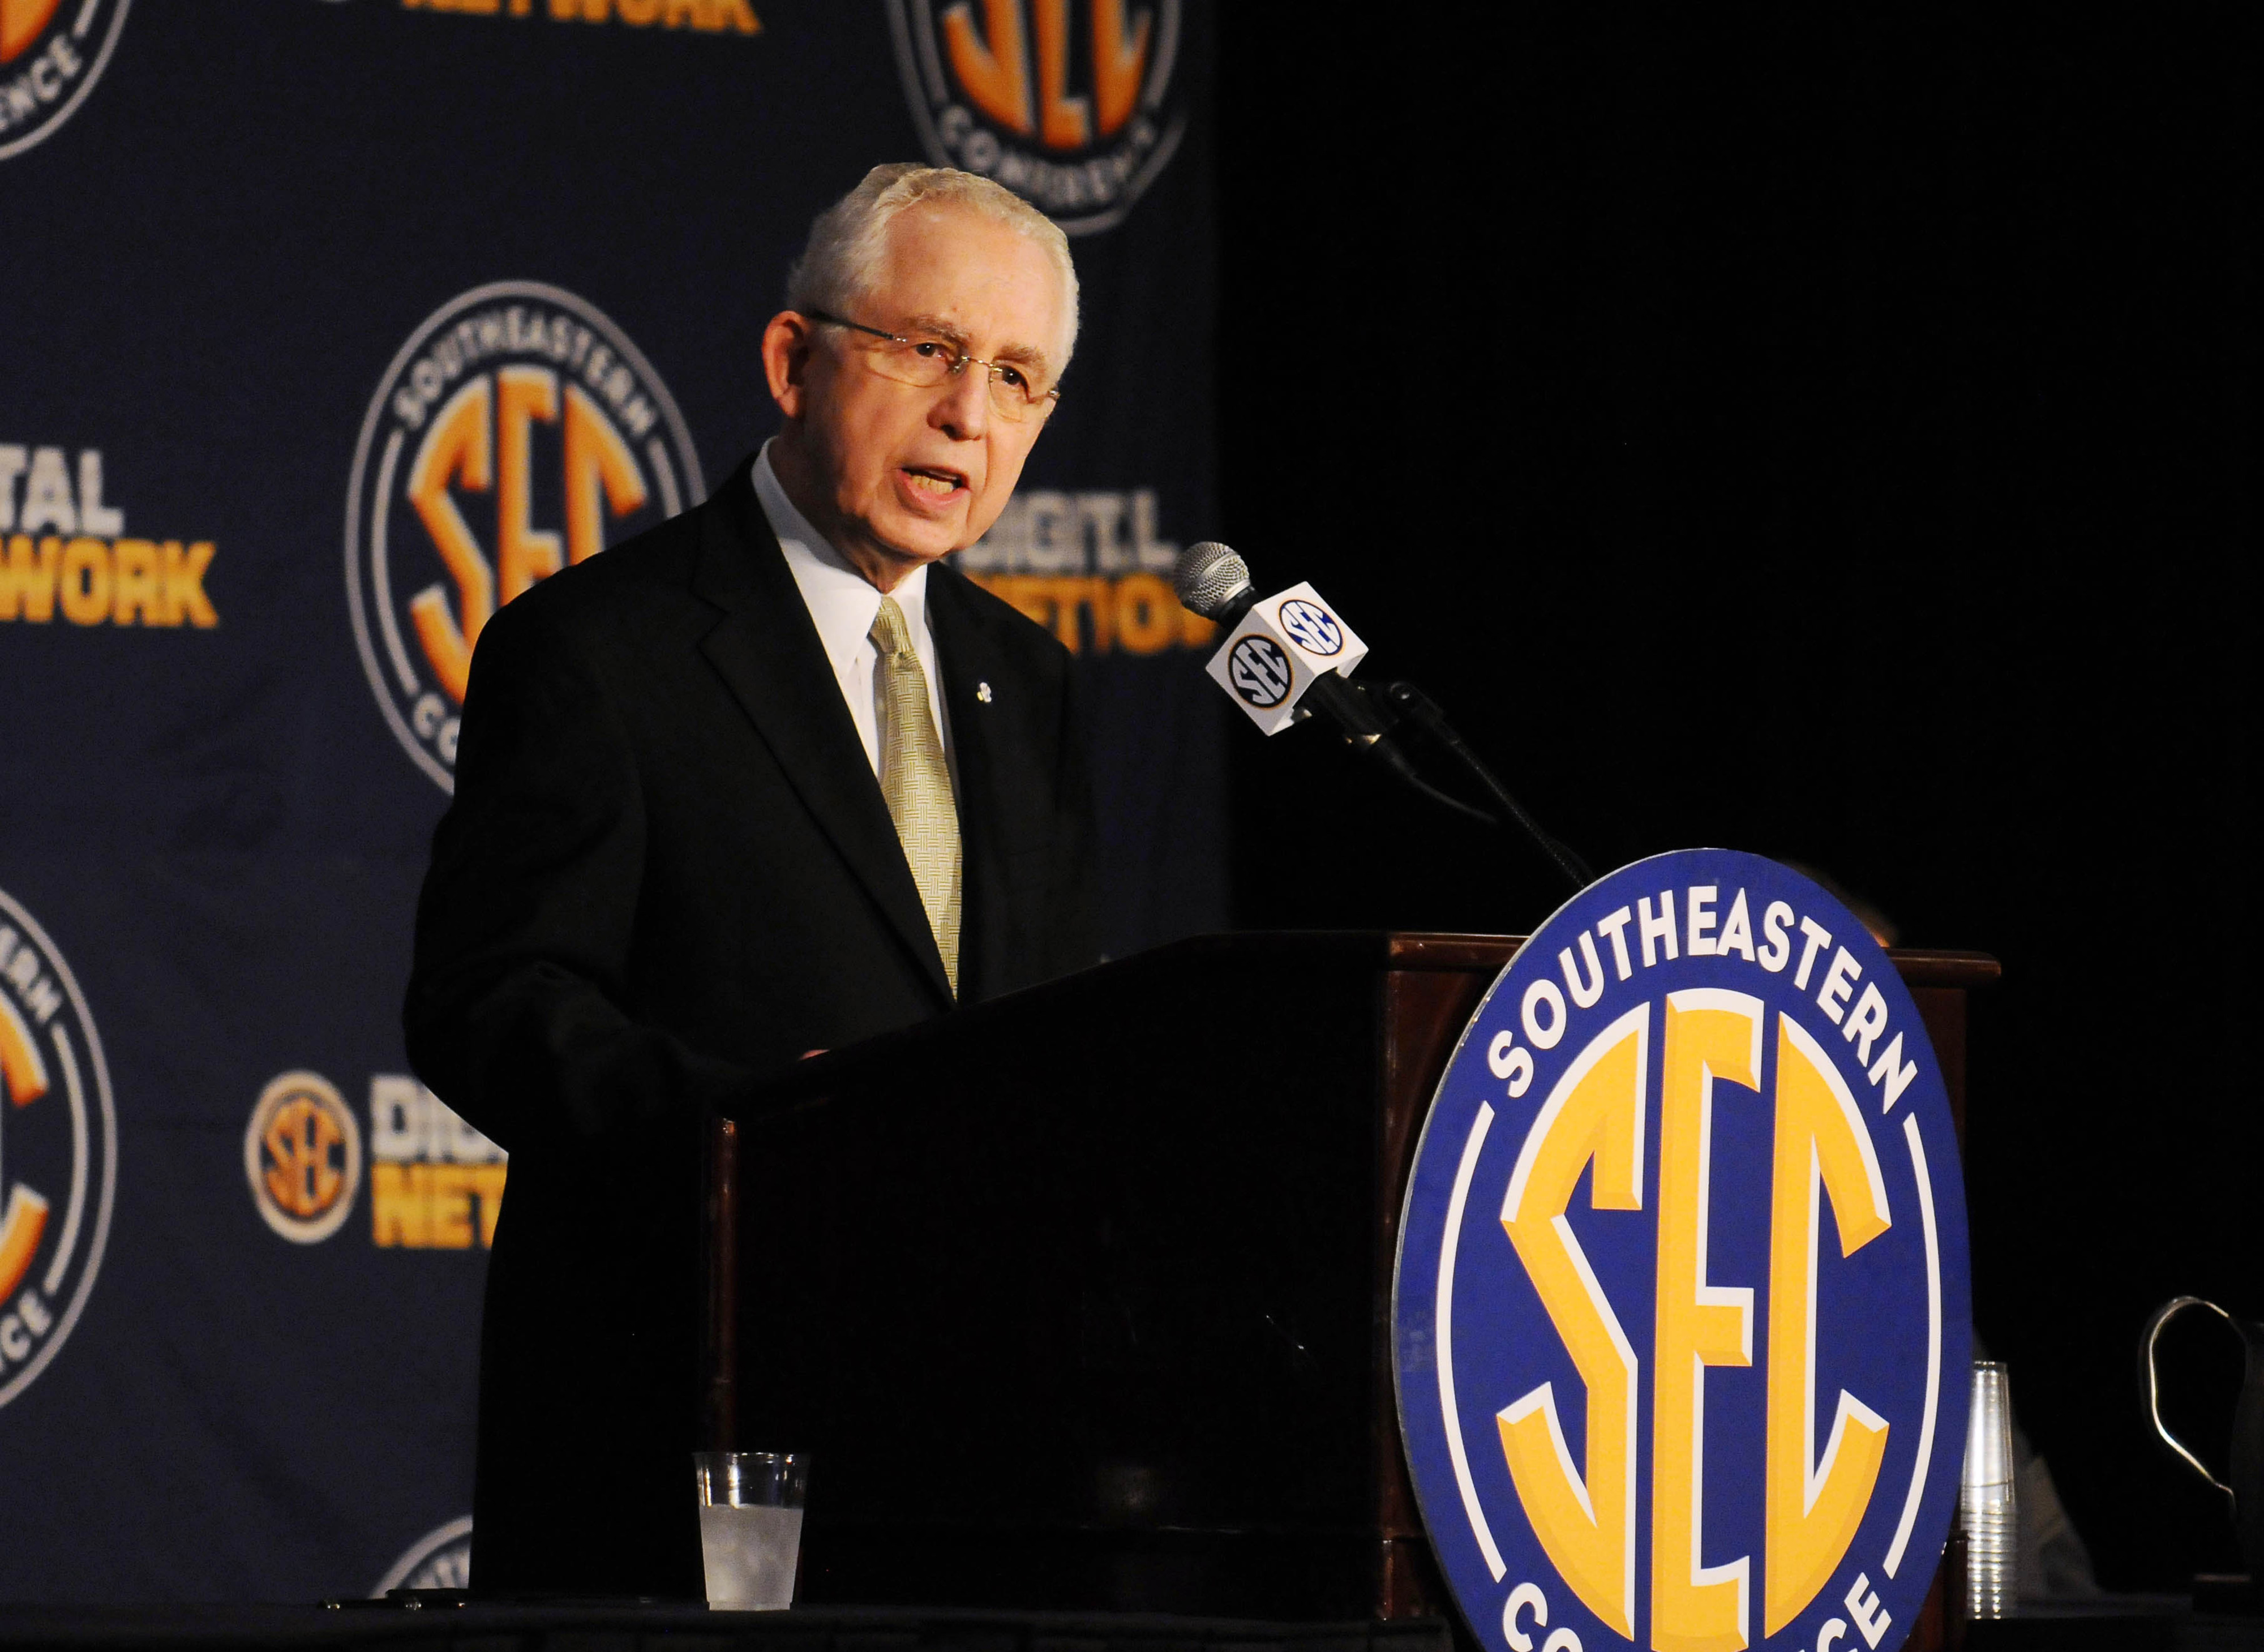 July 17, 2012; Hoover, AL, USA;  SEC commissioner Mike Slive speaks at a press conference during the 2012 SEC media days event at the Wynfrey Hotel.   Mandatory Credit: Kelly Lambert-US PRESSWIRE